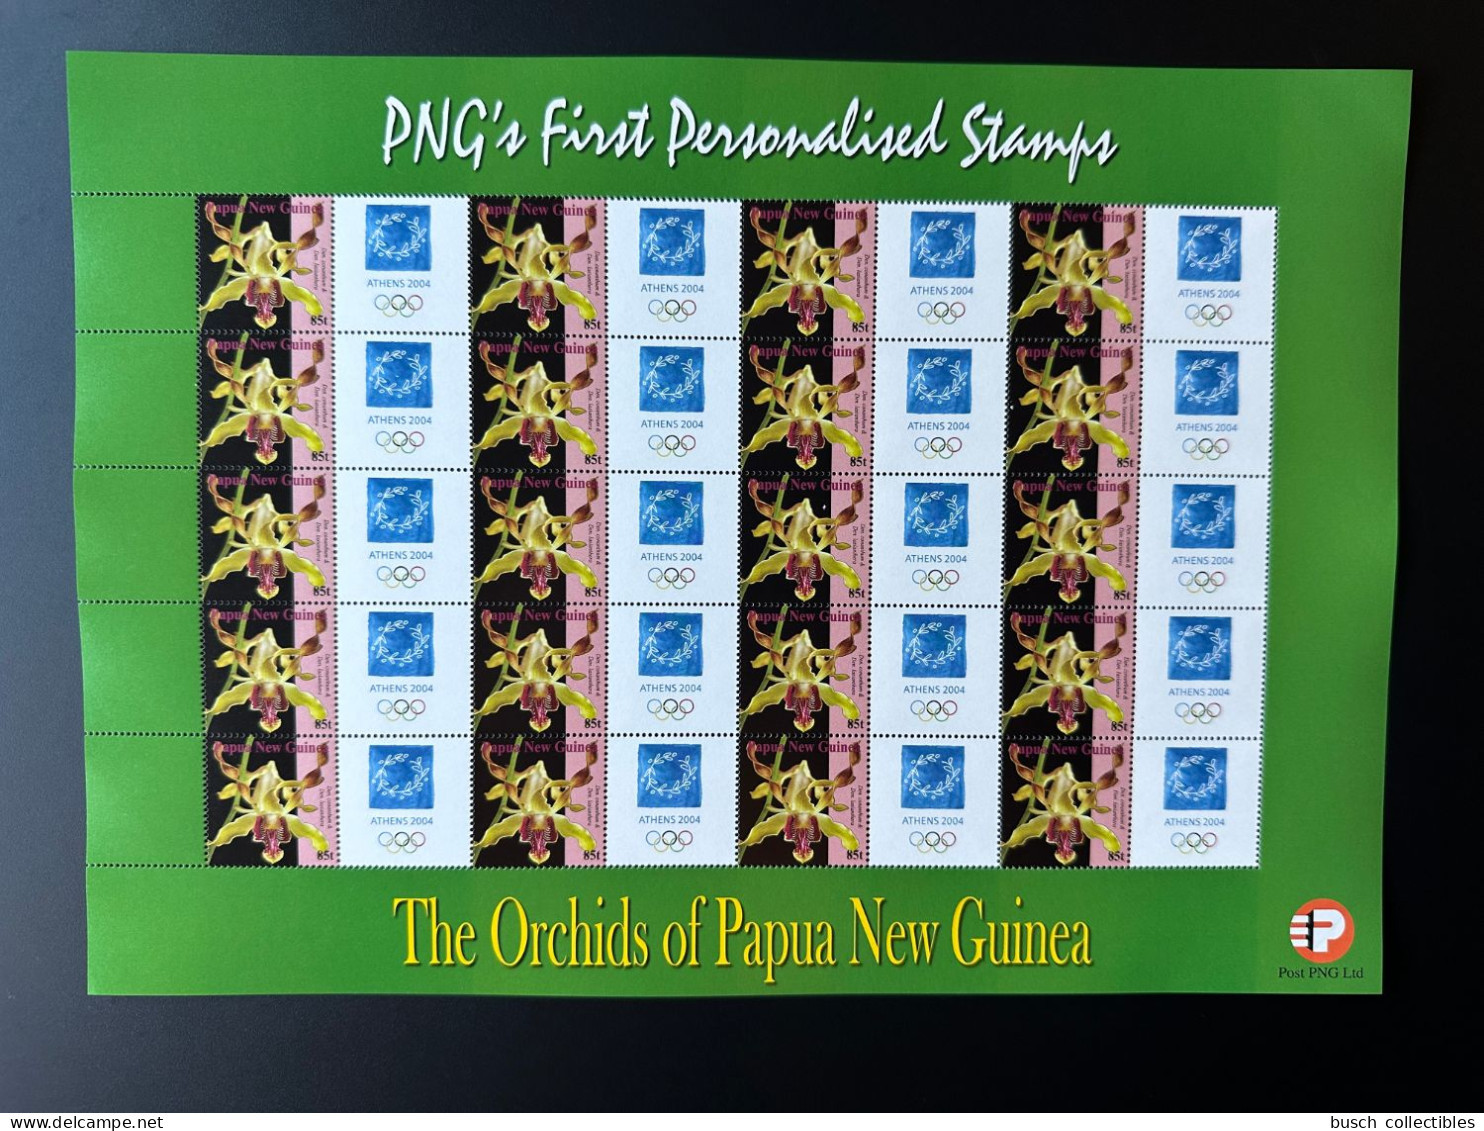 Papua New Guinea PNG 2007 Mi. 1244 Personalized Athens 2004 Olympic Games Jeux Olympiques Olympia Athen Orchids Flowers - Orchideen